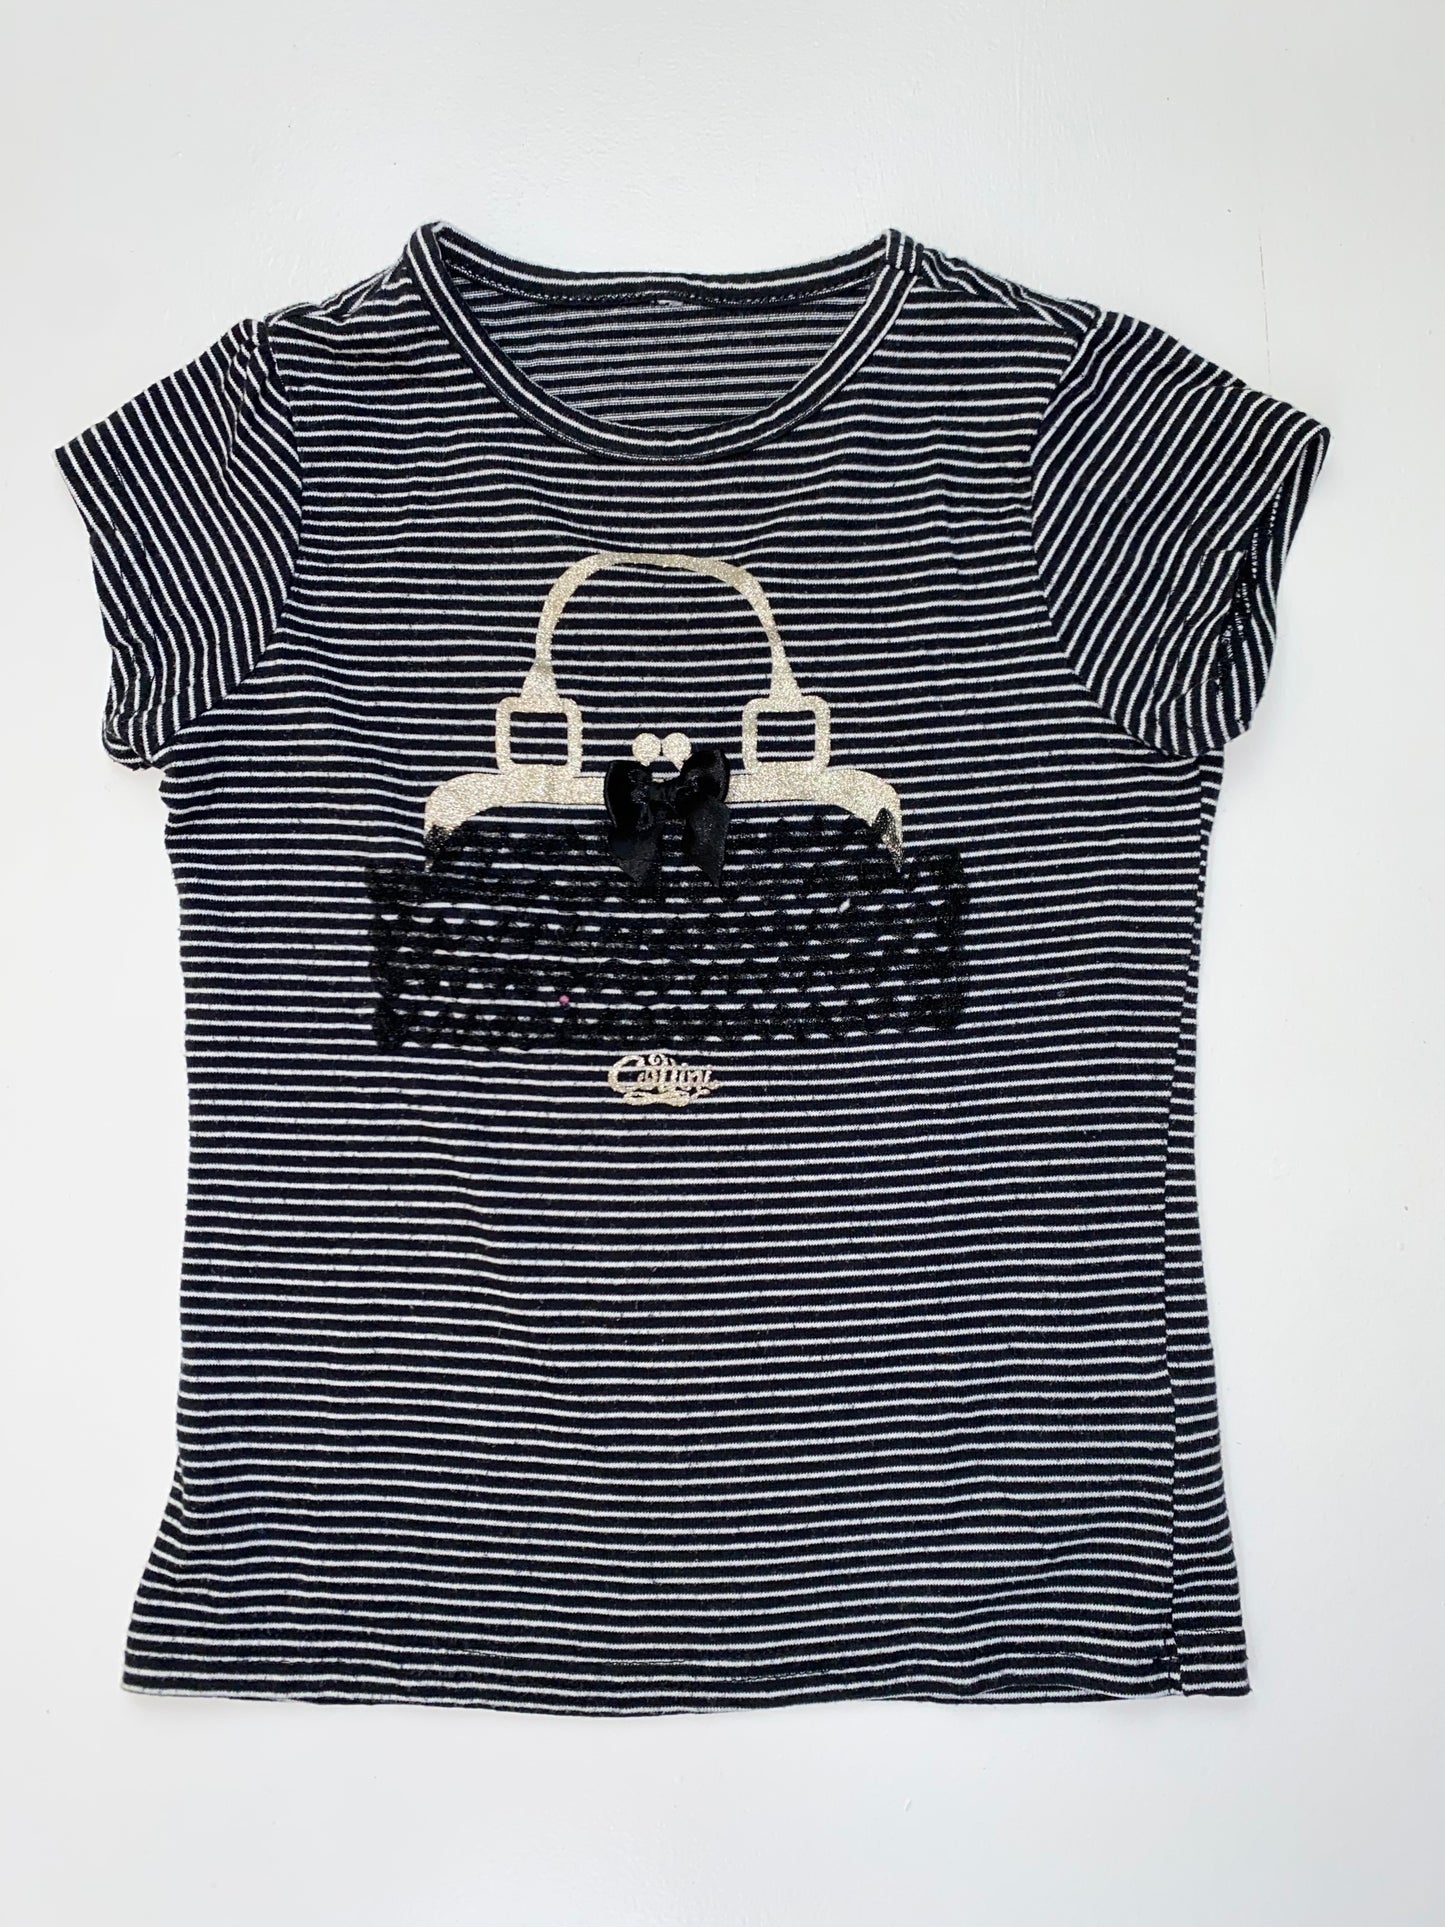 Black and White Striped T-Shirt with Purse 4T